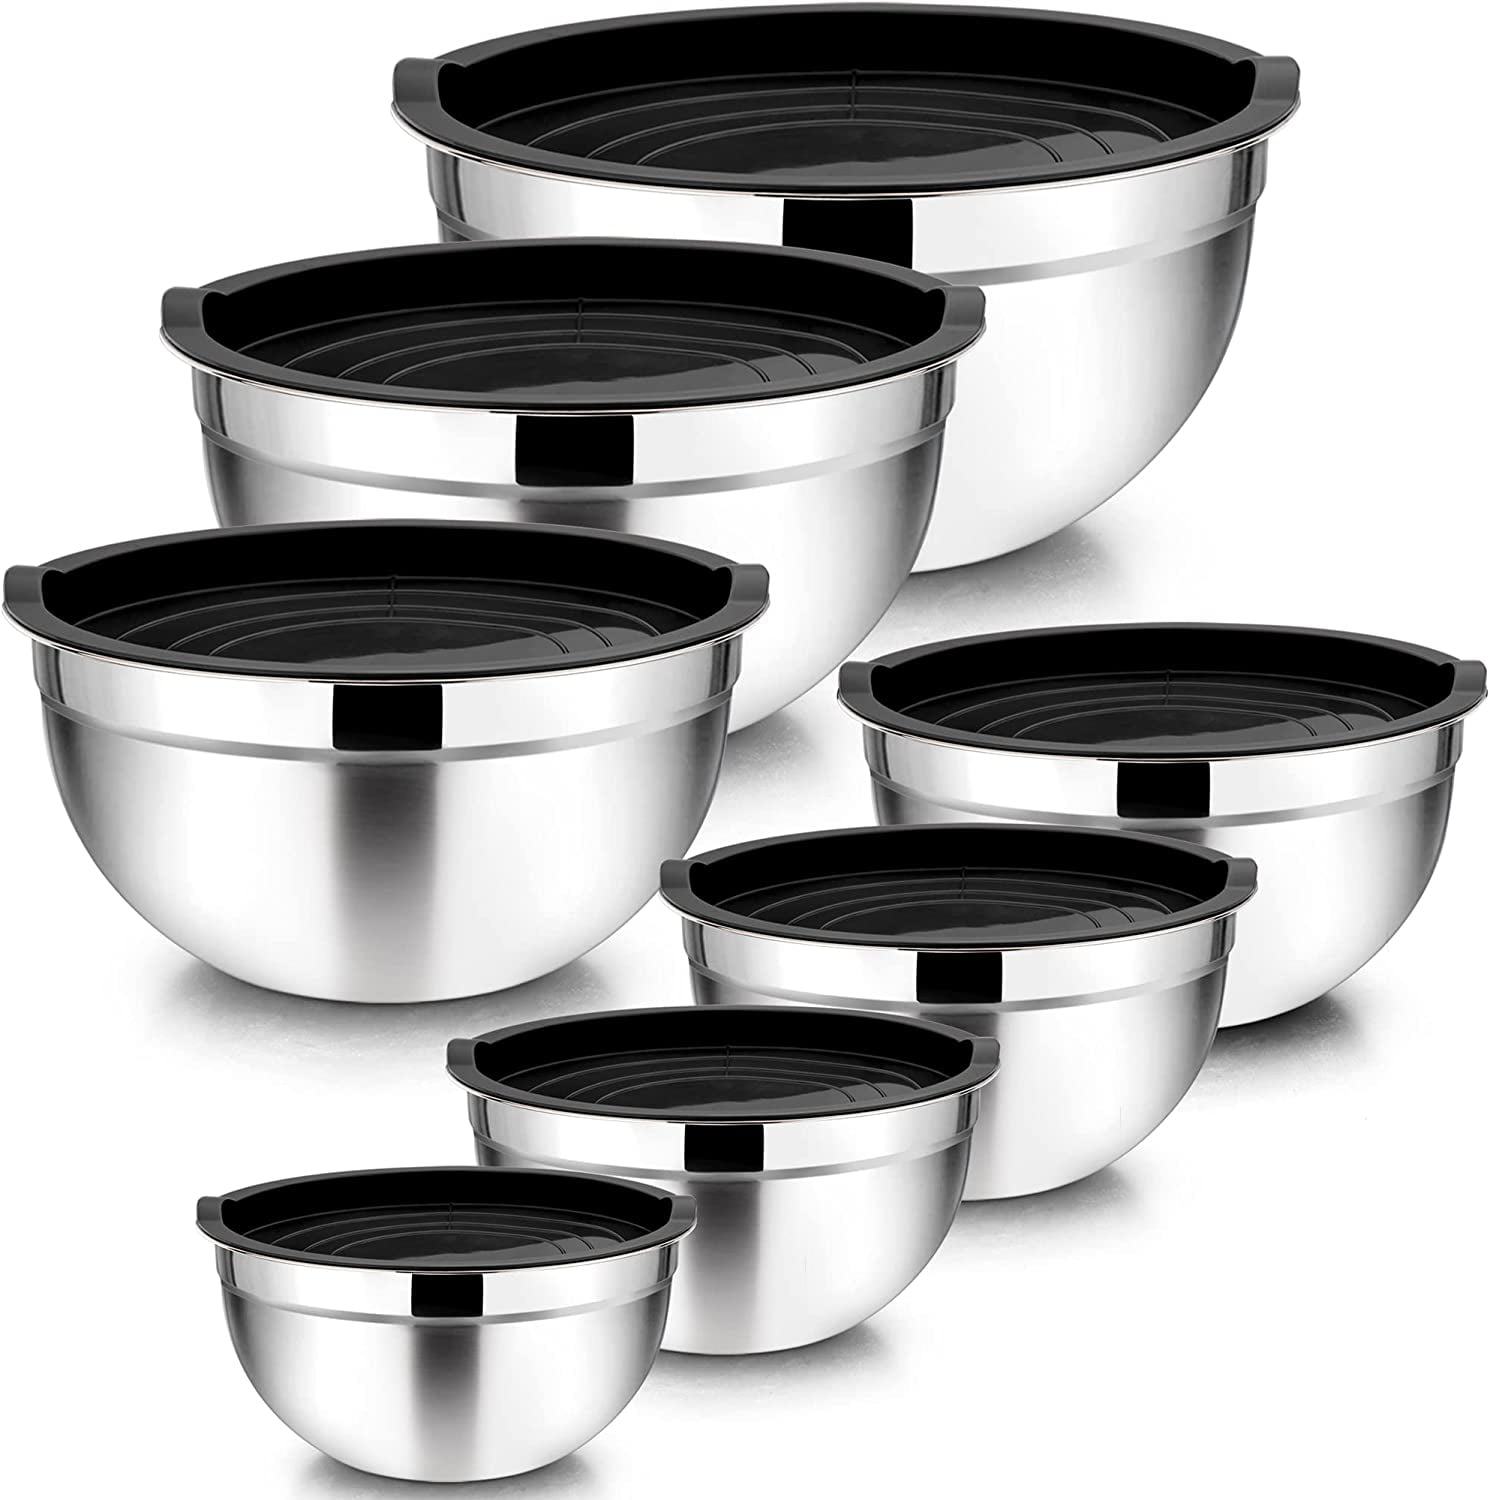 Mixing Bowls with Lids Set of 5, VeSteel Stainless Steel Mixing Bowls Metal  Nesting Bowls with Airtight Lids for Cooking, Baking, Serving